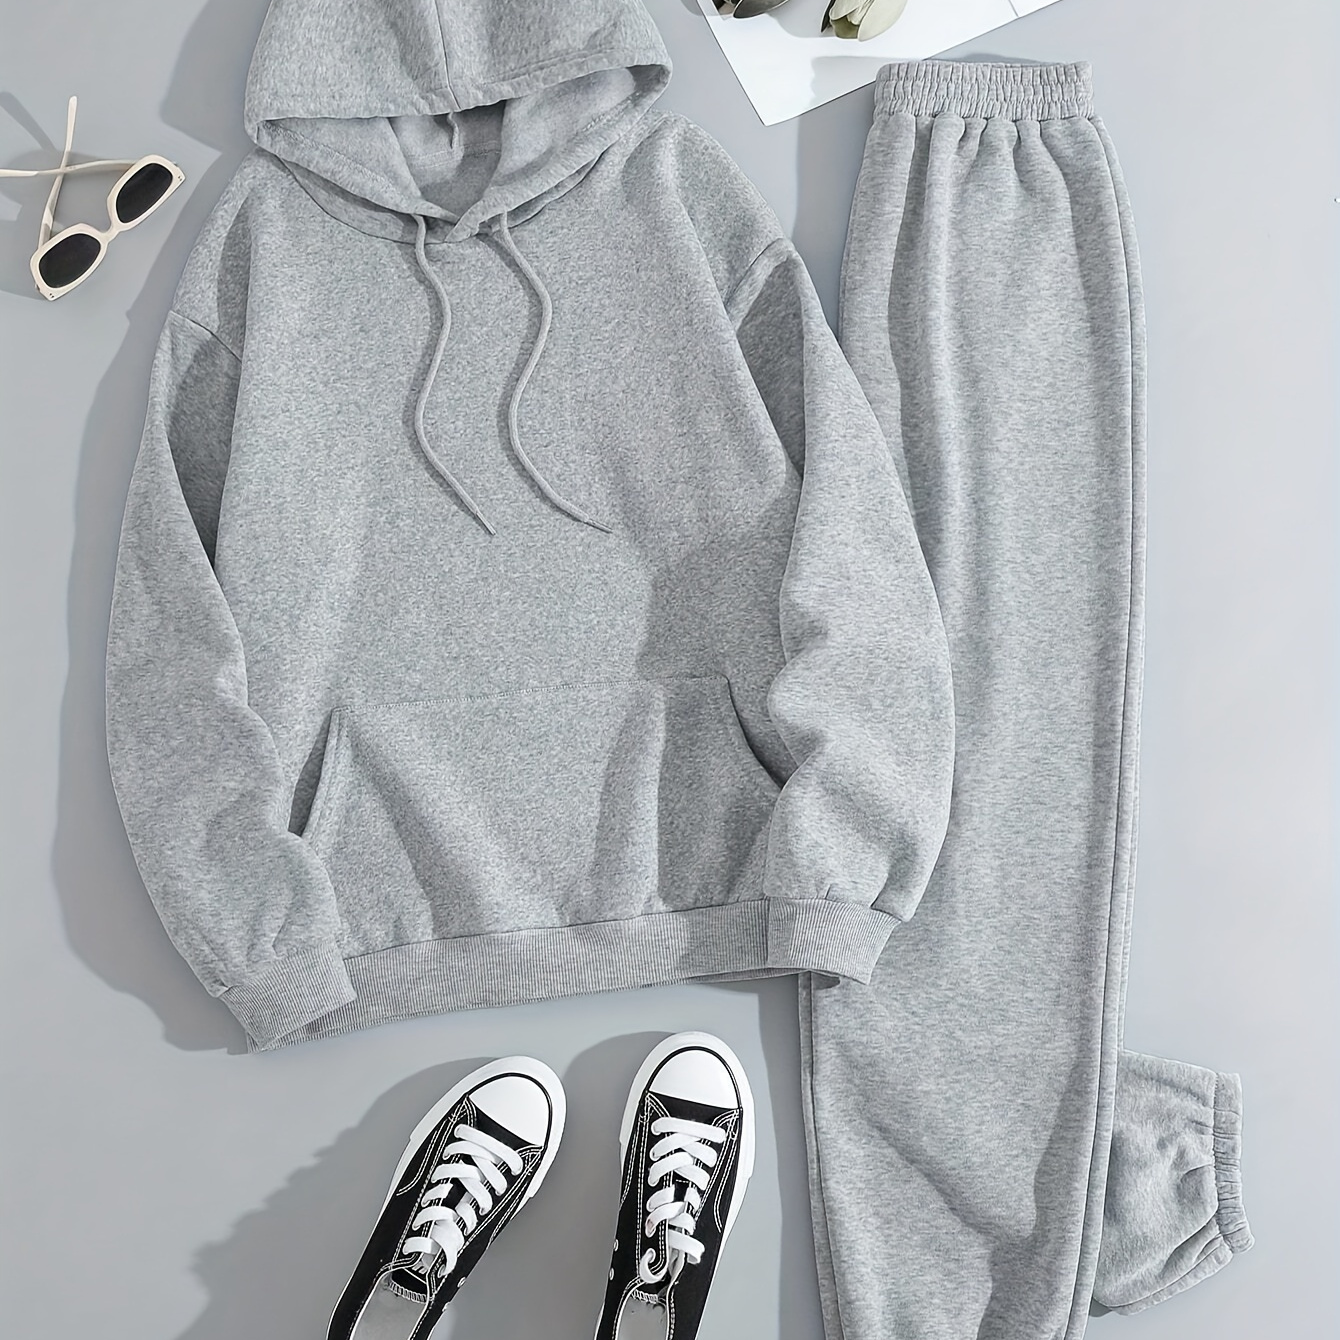 

Plush Lined Hoodie And Sweatpants Set For Women, Kangaroo Pocket Drawstring Hooded Sweatshirt With Matching Joggers, Winter Loungewear Tracksuit, Casual Sporty Outfit